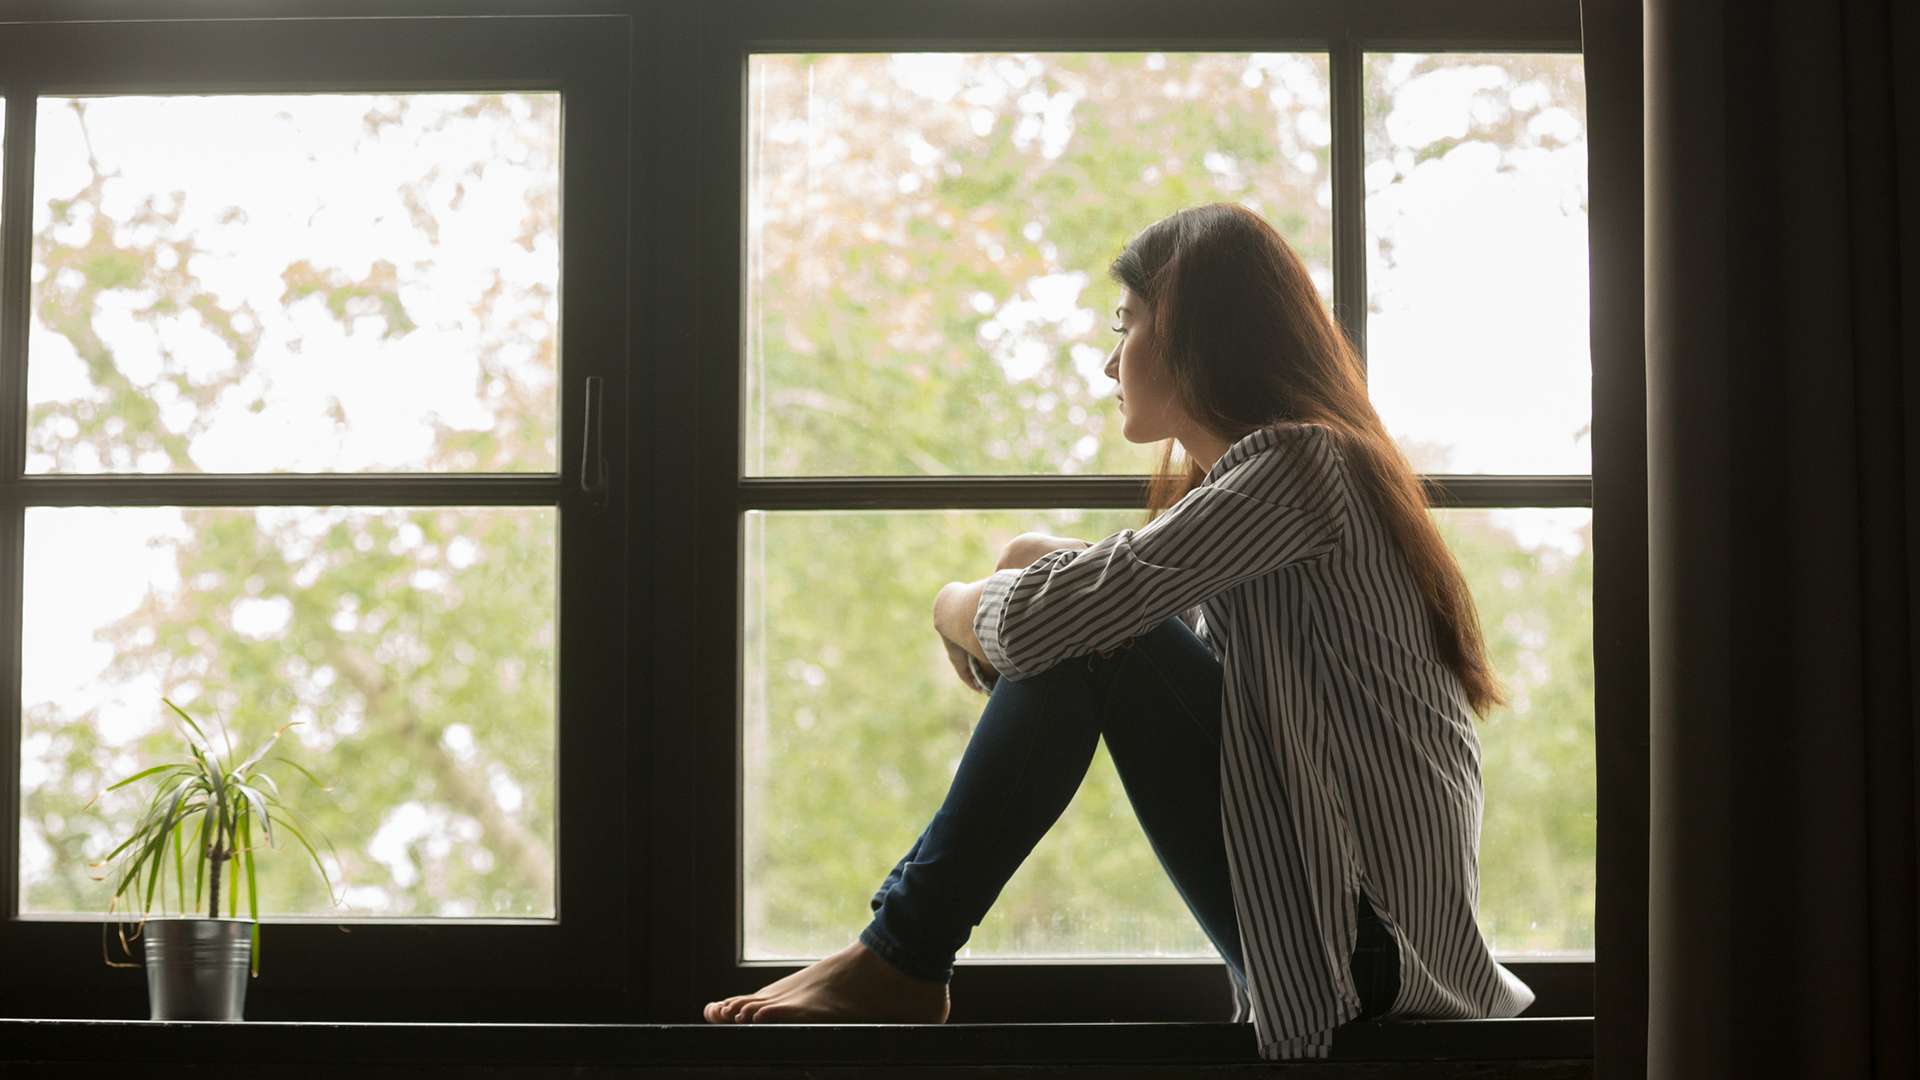 Thoughtful girl sitting on window seat looking out window